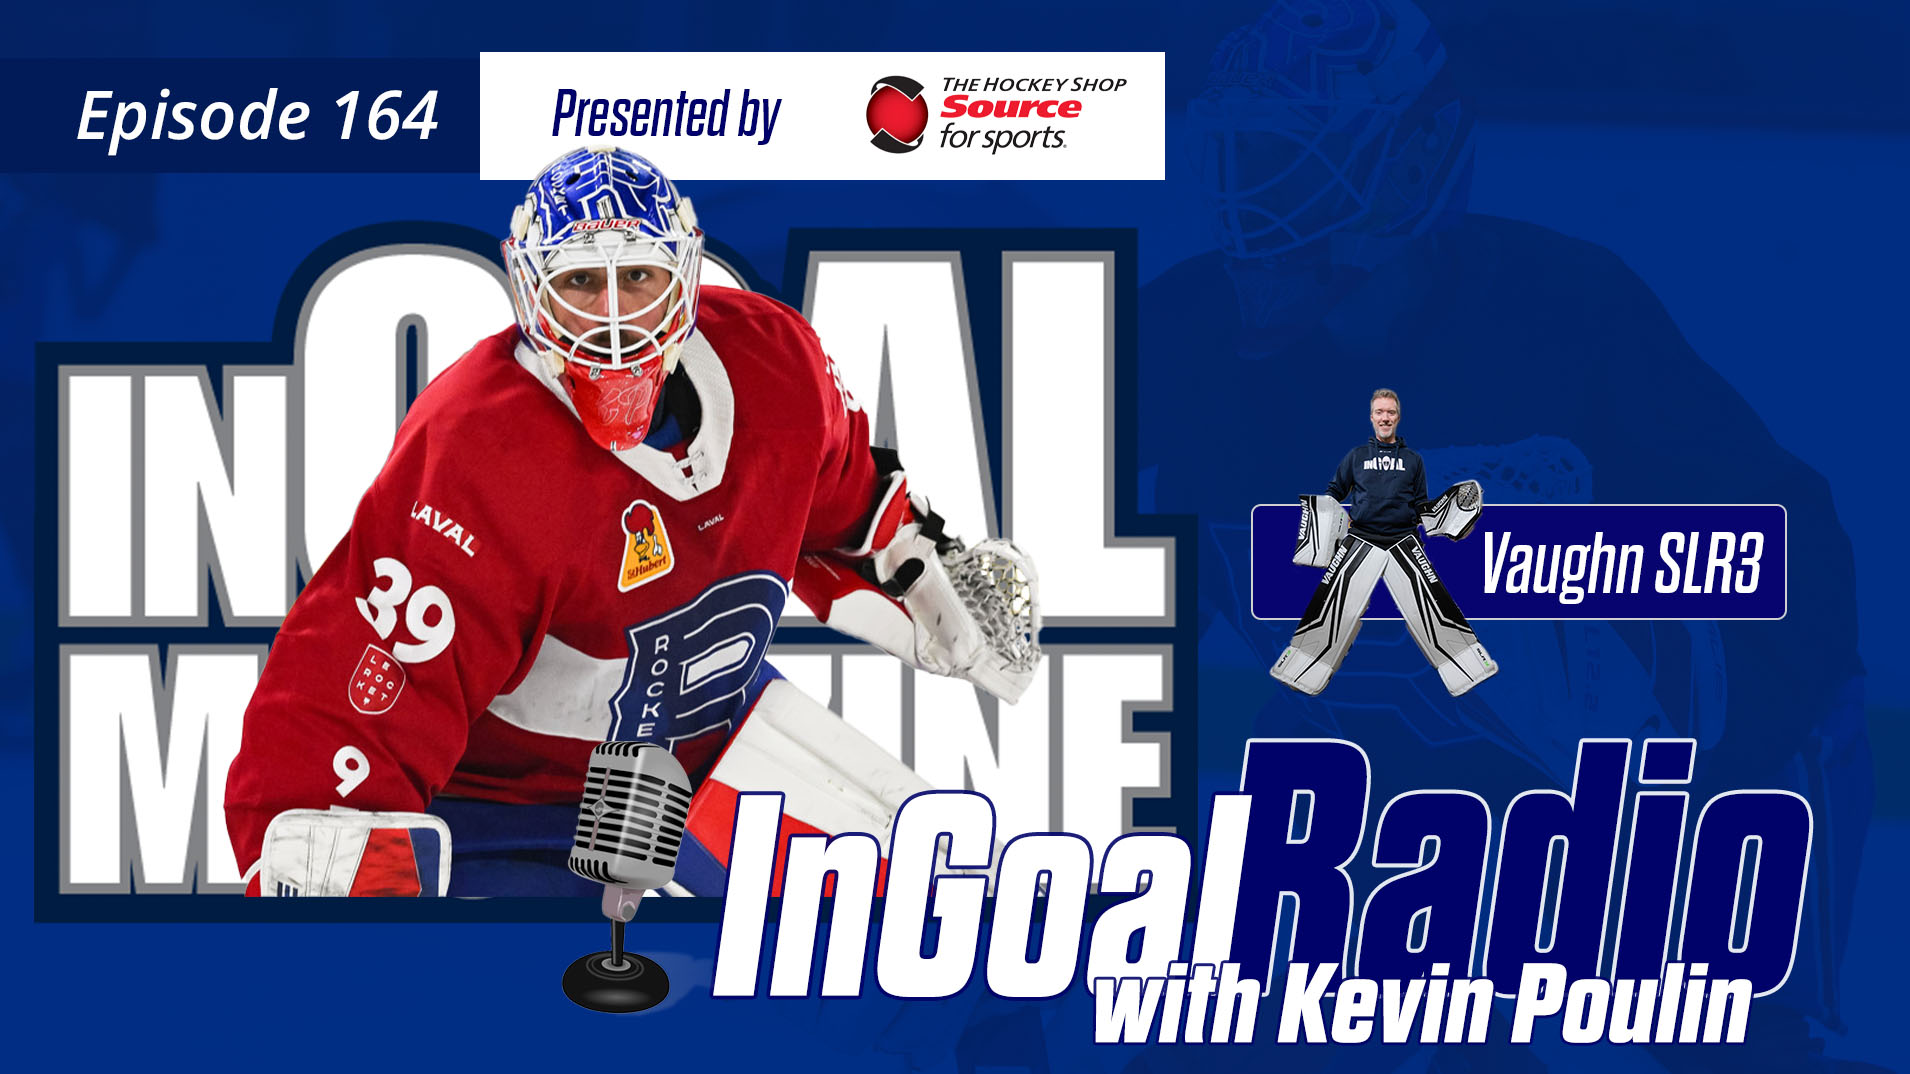 InGoal Radio Episode 164with Kevin Poulin